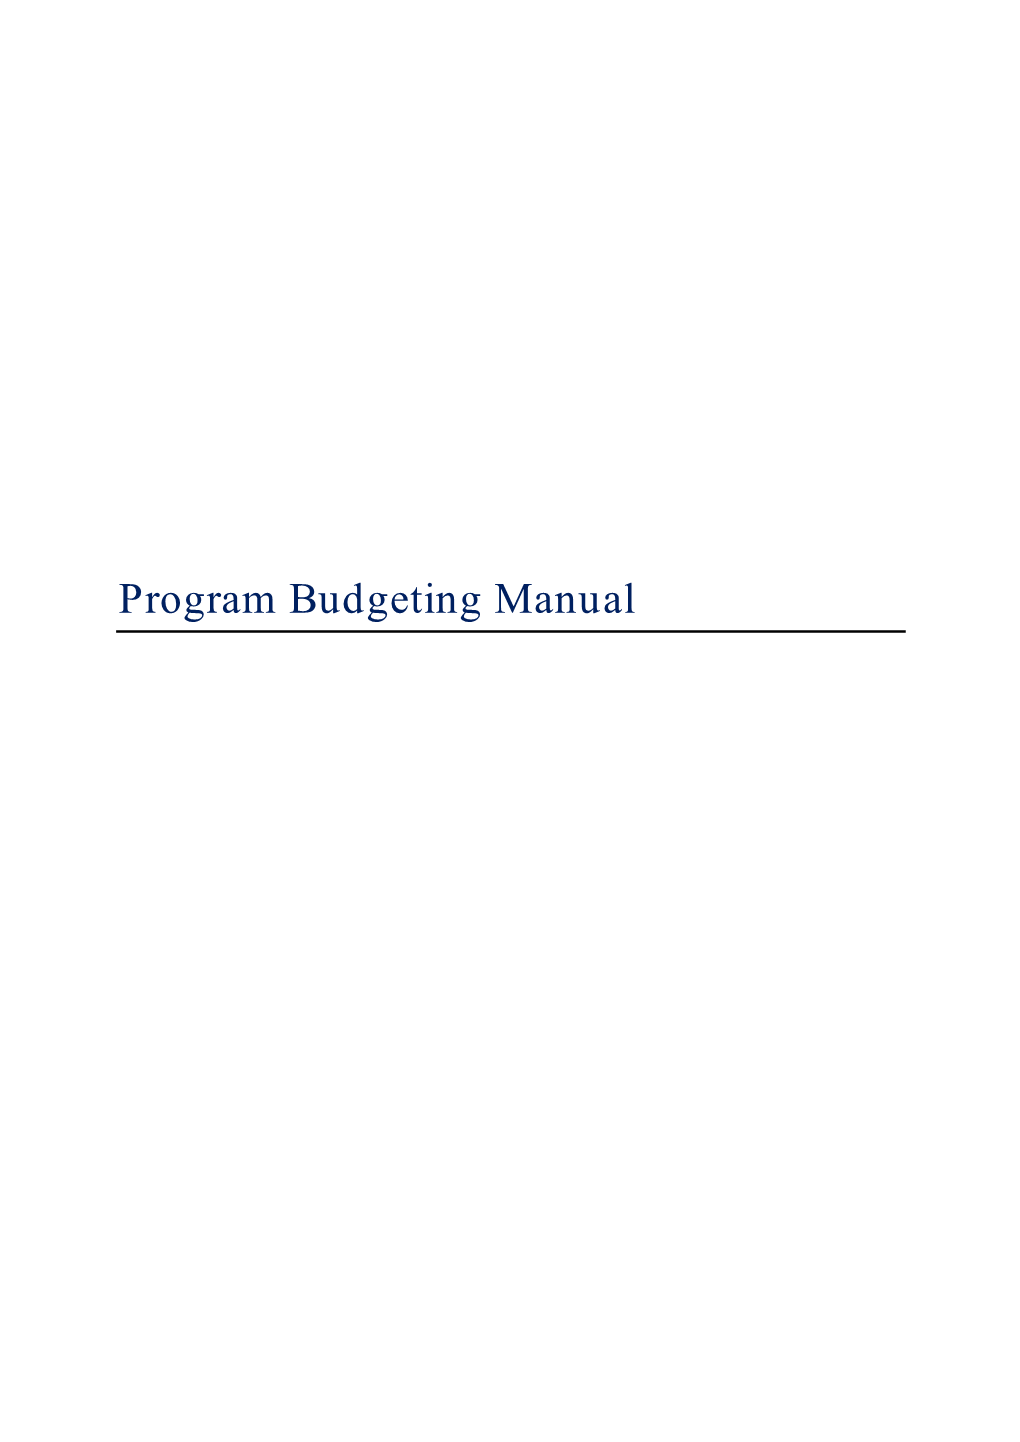 Program Budgeting Manual This Project Is Funded by the European Union